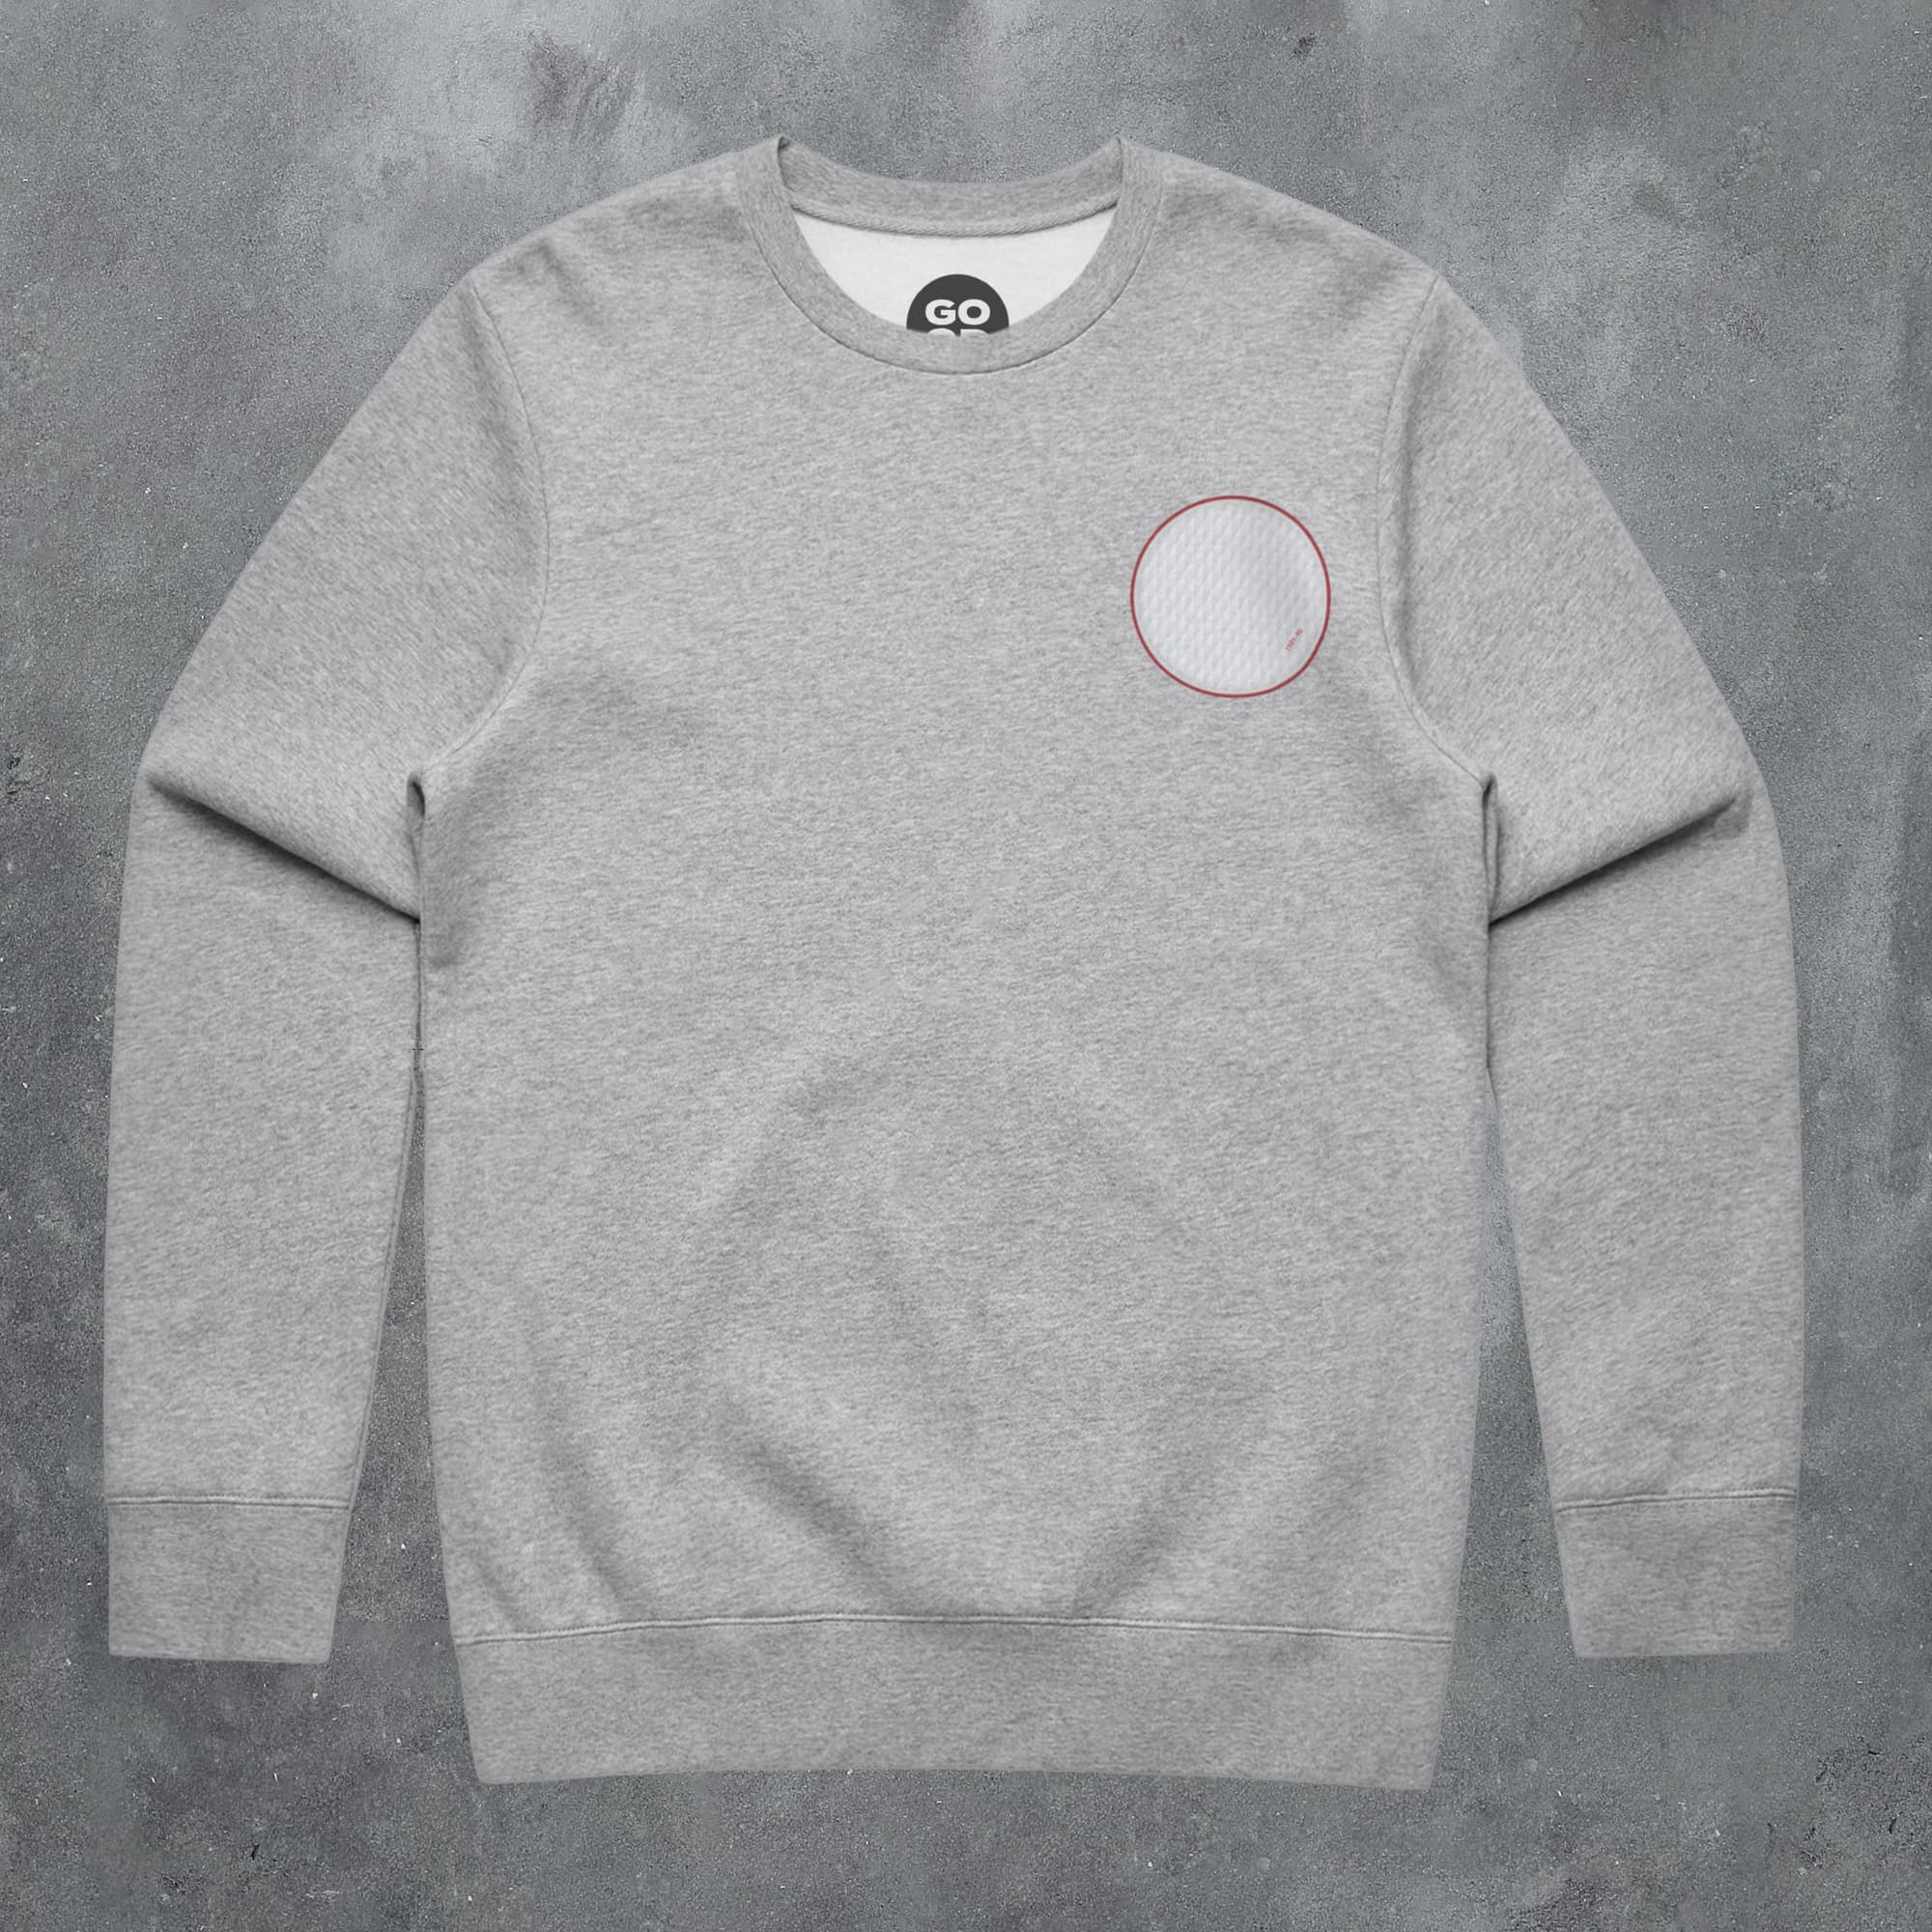 a grey sweatshirt with a red circle on the chest